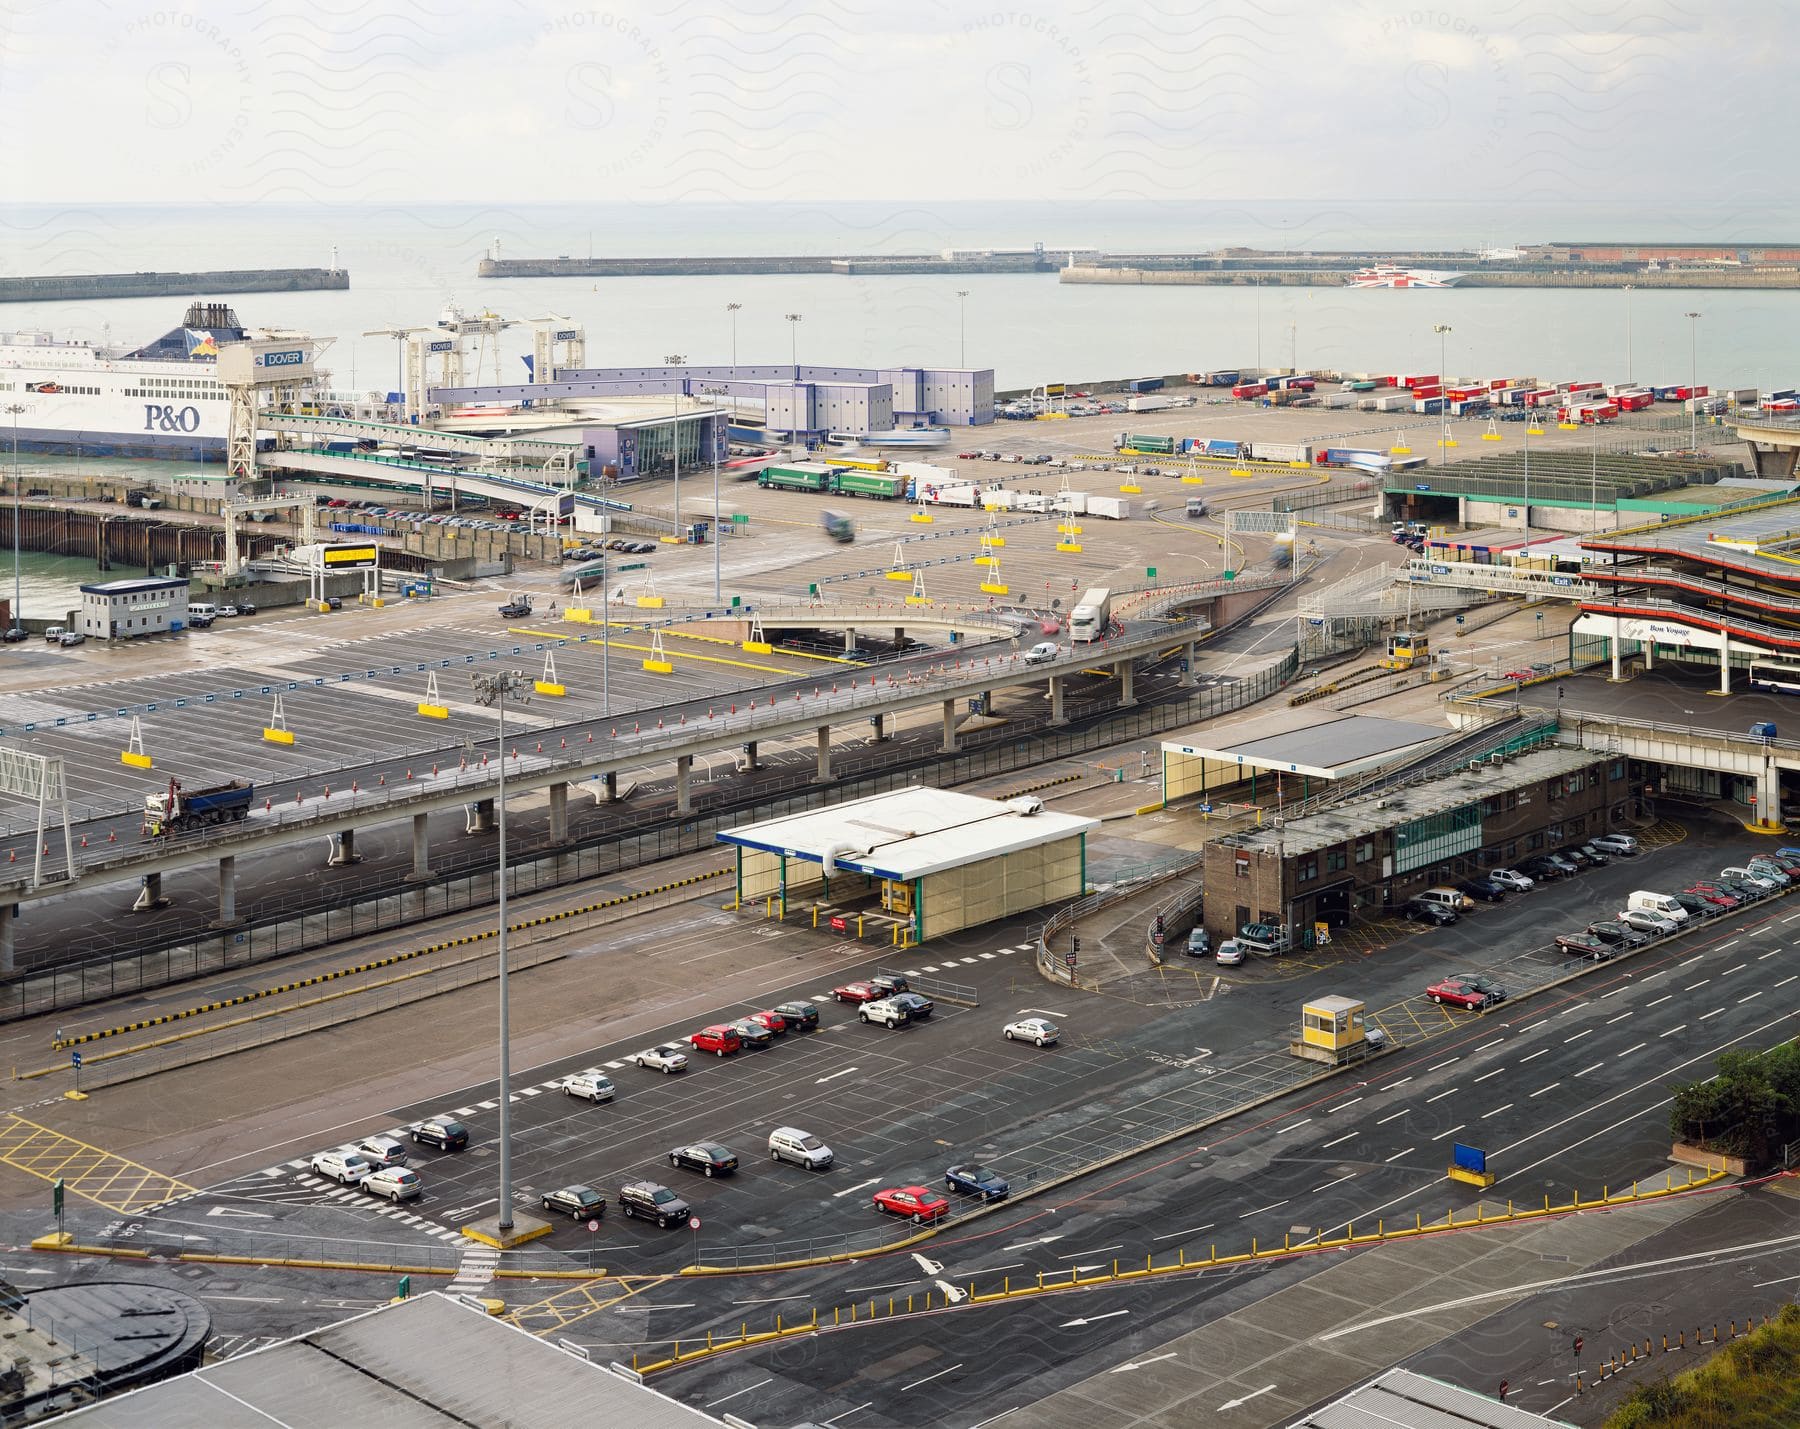 Aerial view of a port with a large cruise ship docked and semi trailers and cars in the port parking lots